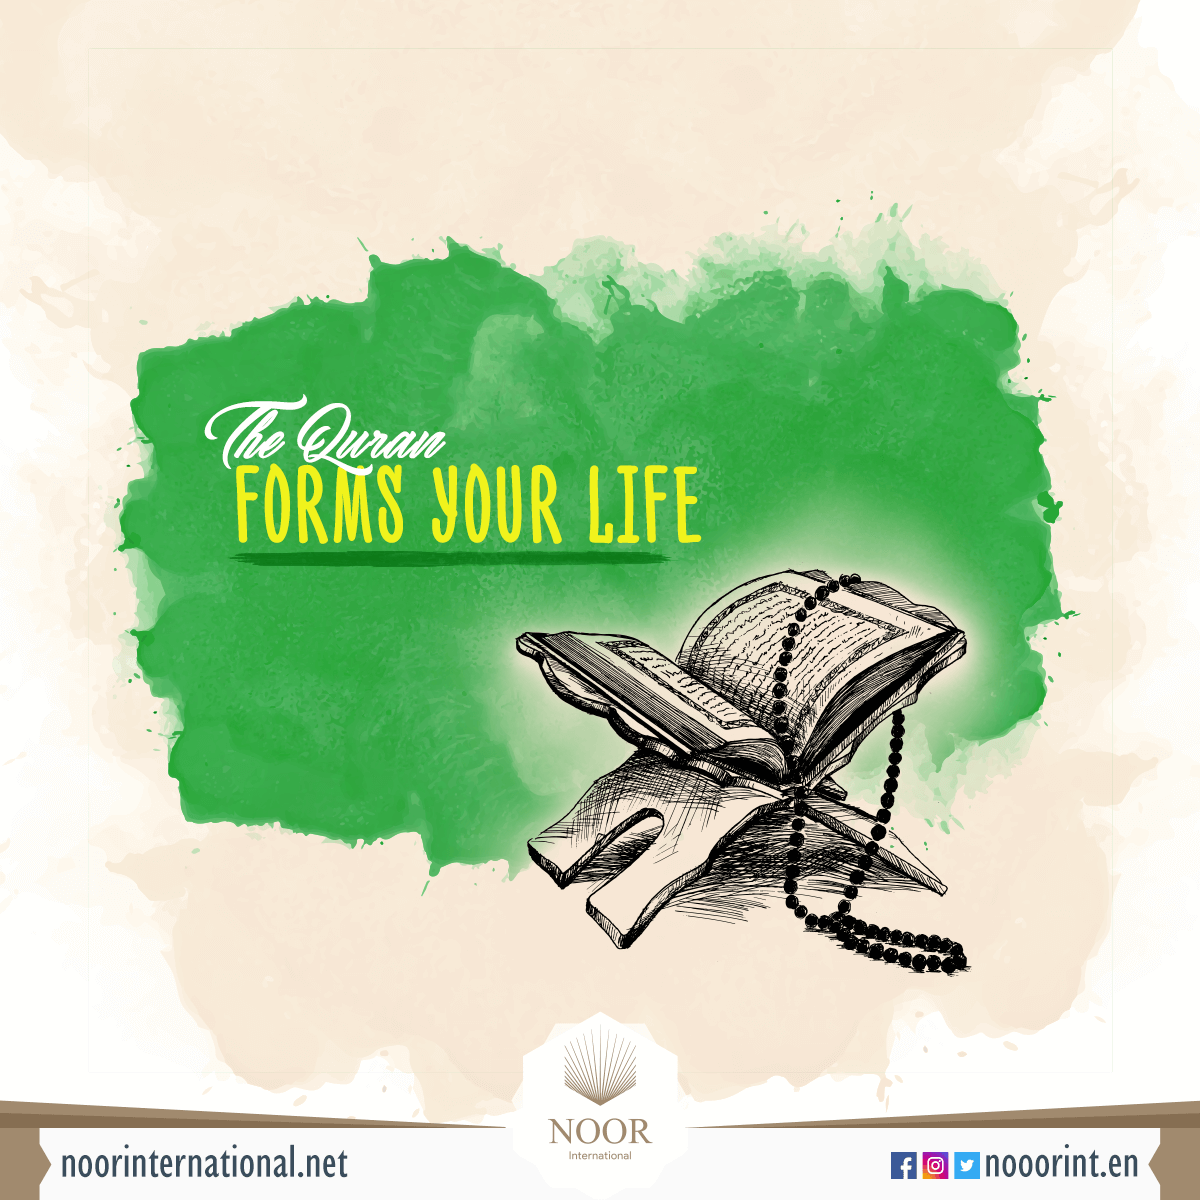 The Quran forms your life